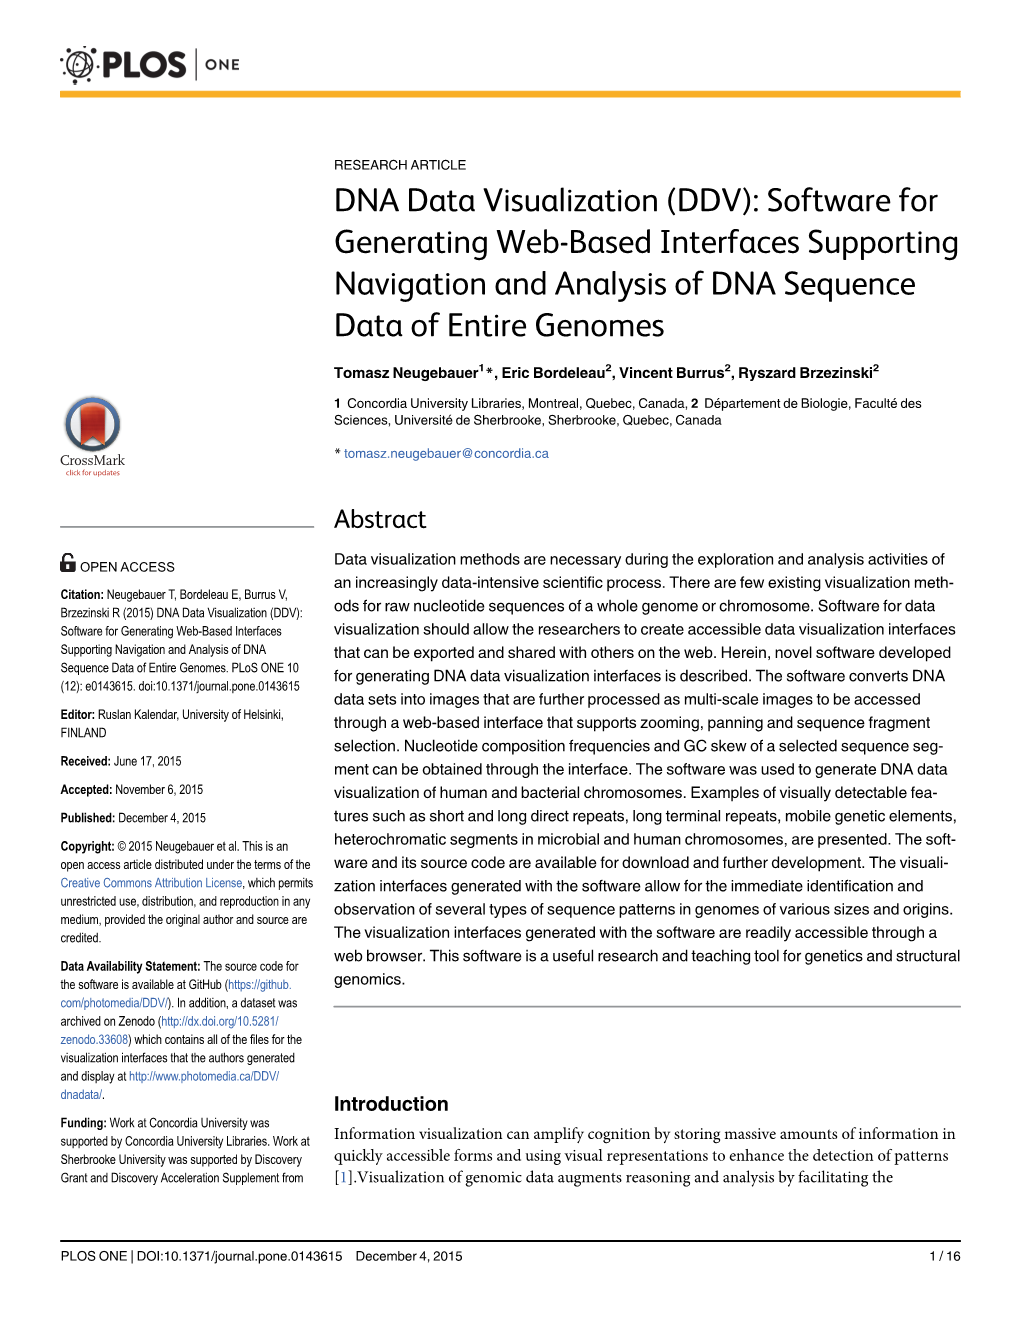 DNA Data Visualization (DDV): Software for Generating Web-Based Interfaces Supporting Navigation and Analysis of DNA Sequence Data of Entire Genomes